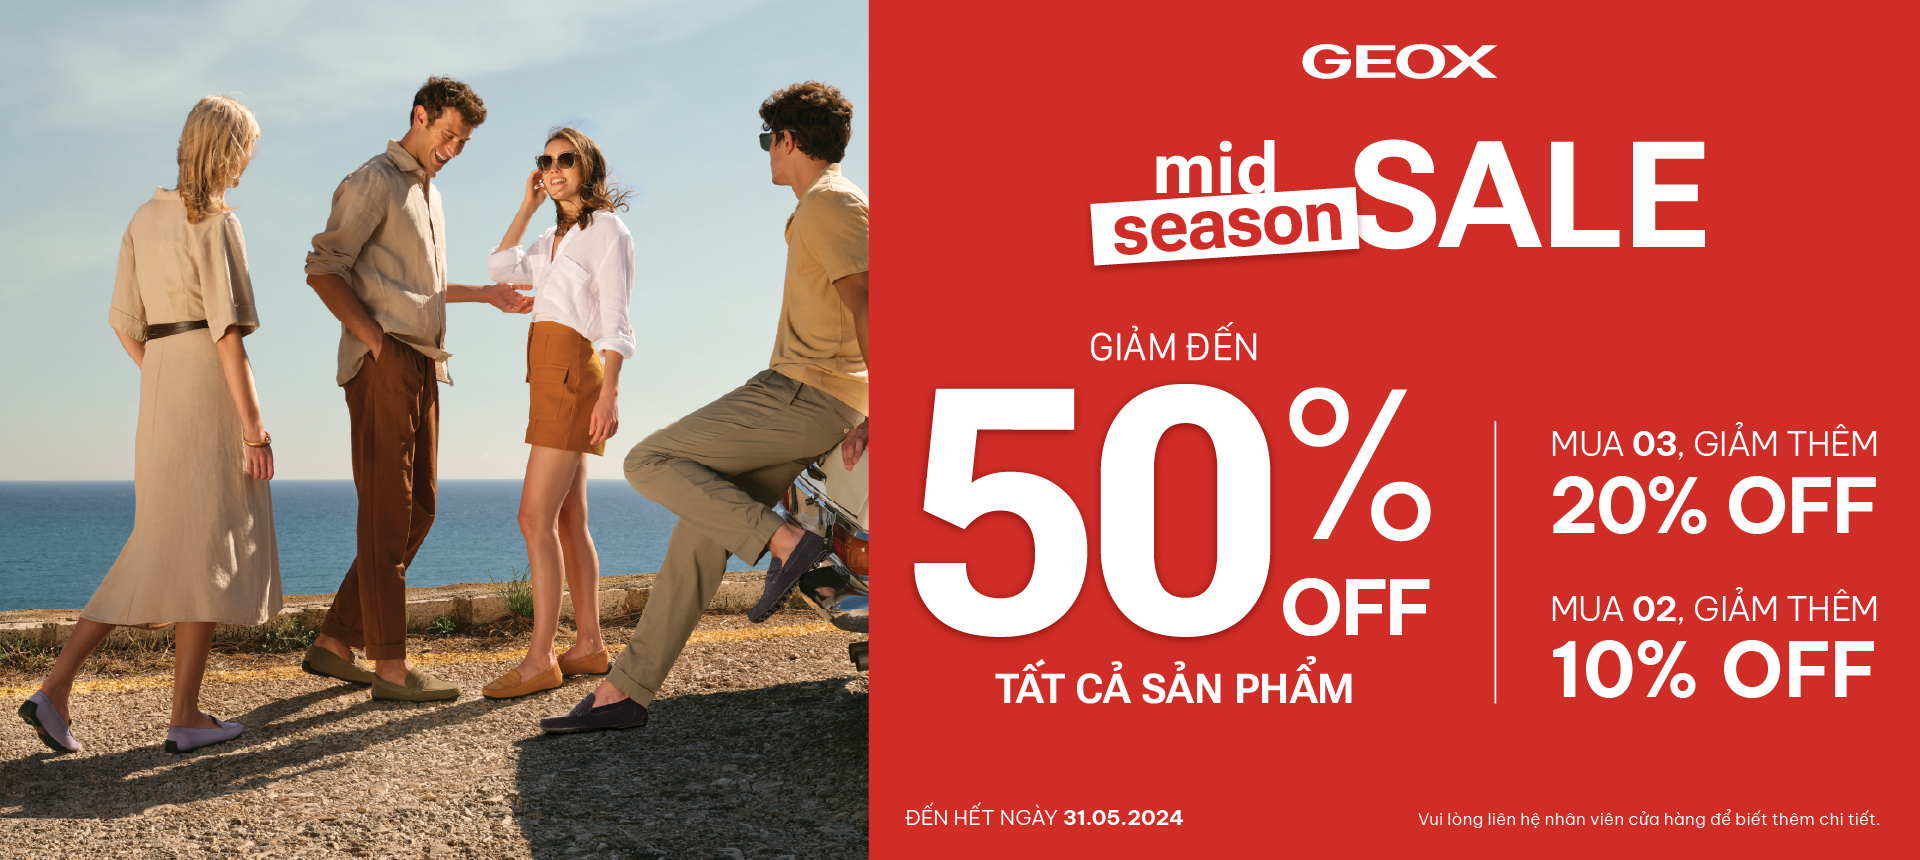 GEOX - MID SEASON SALE - UP TO 50% ALL ITEMS